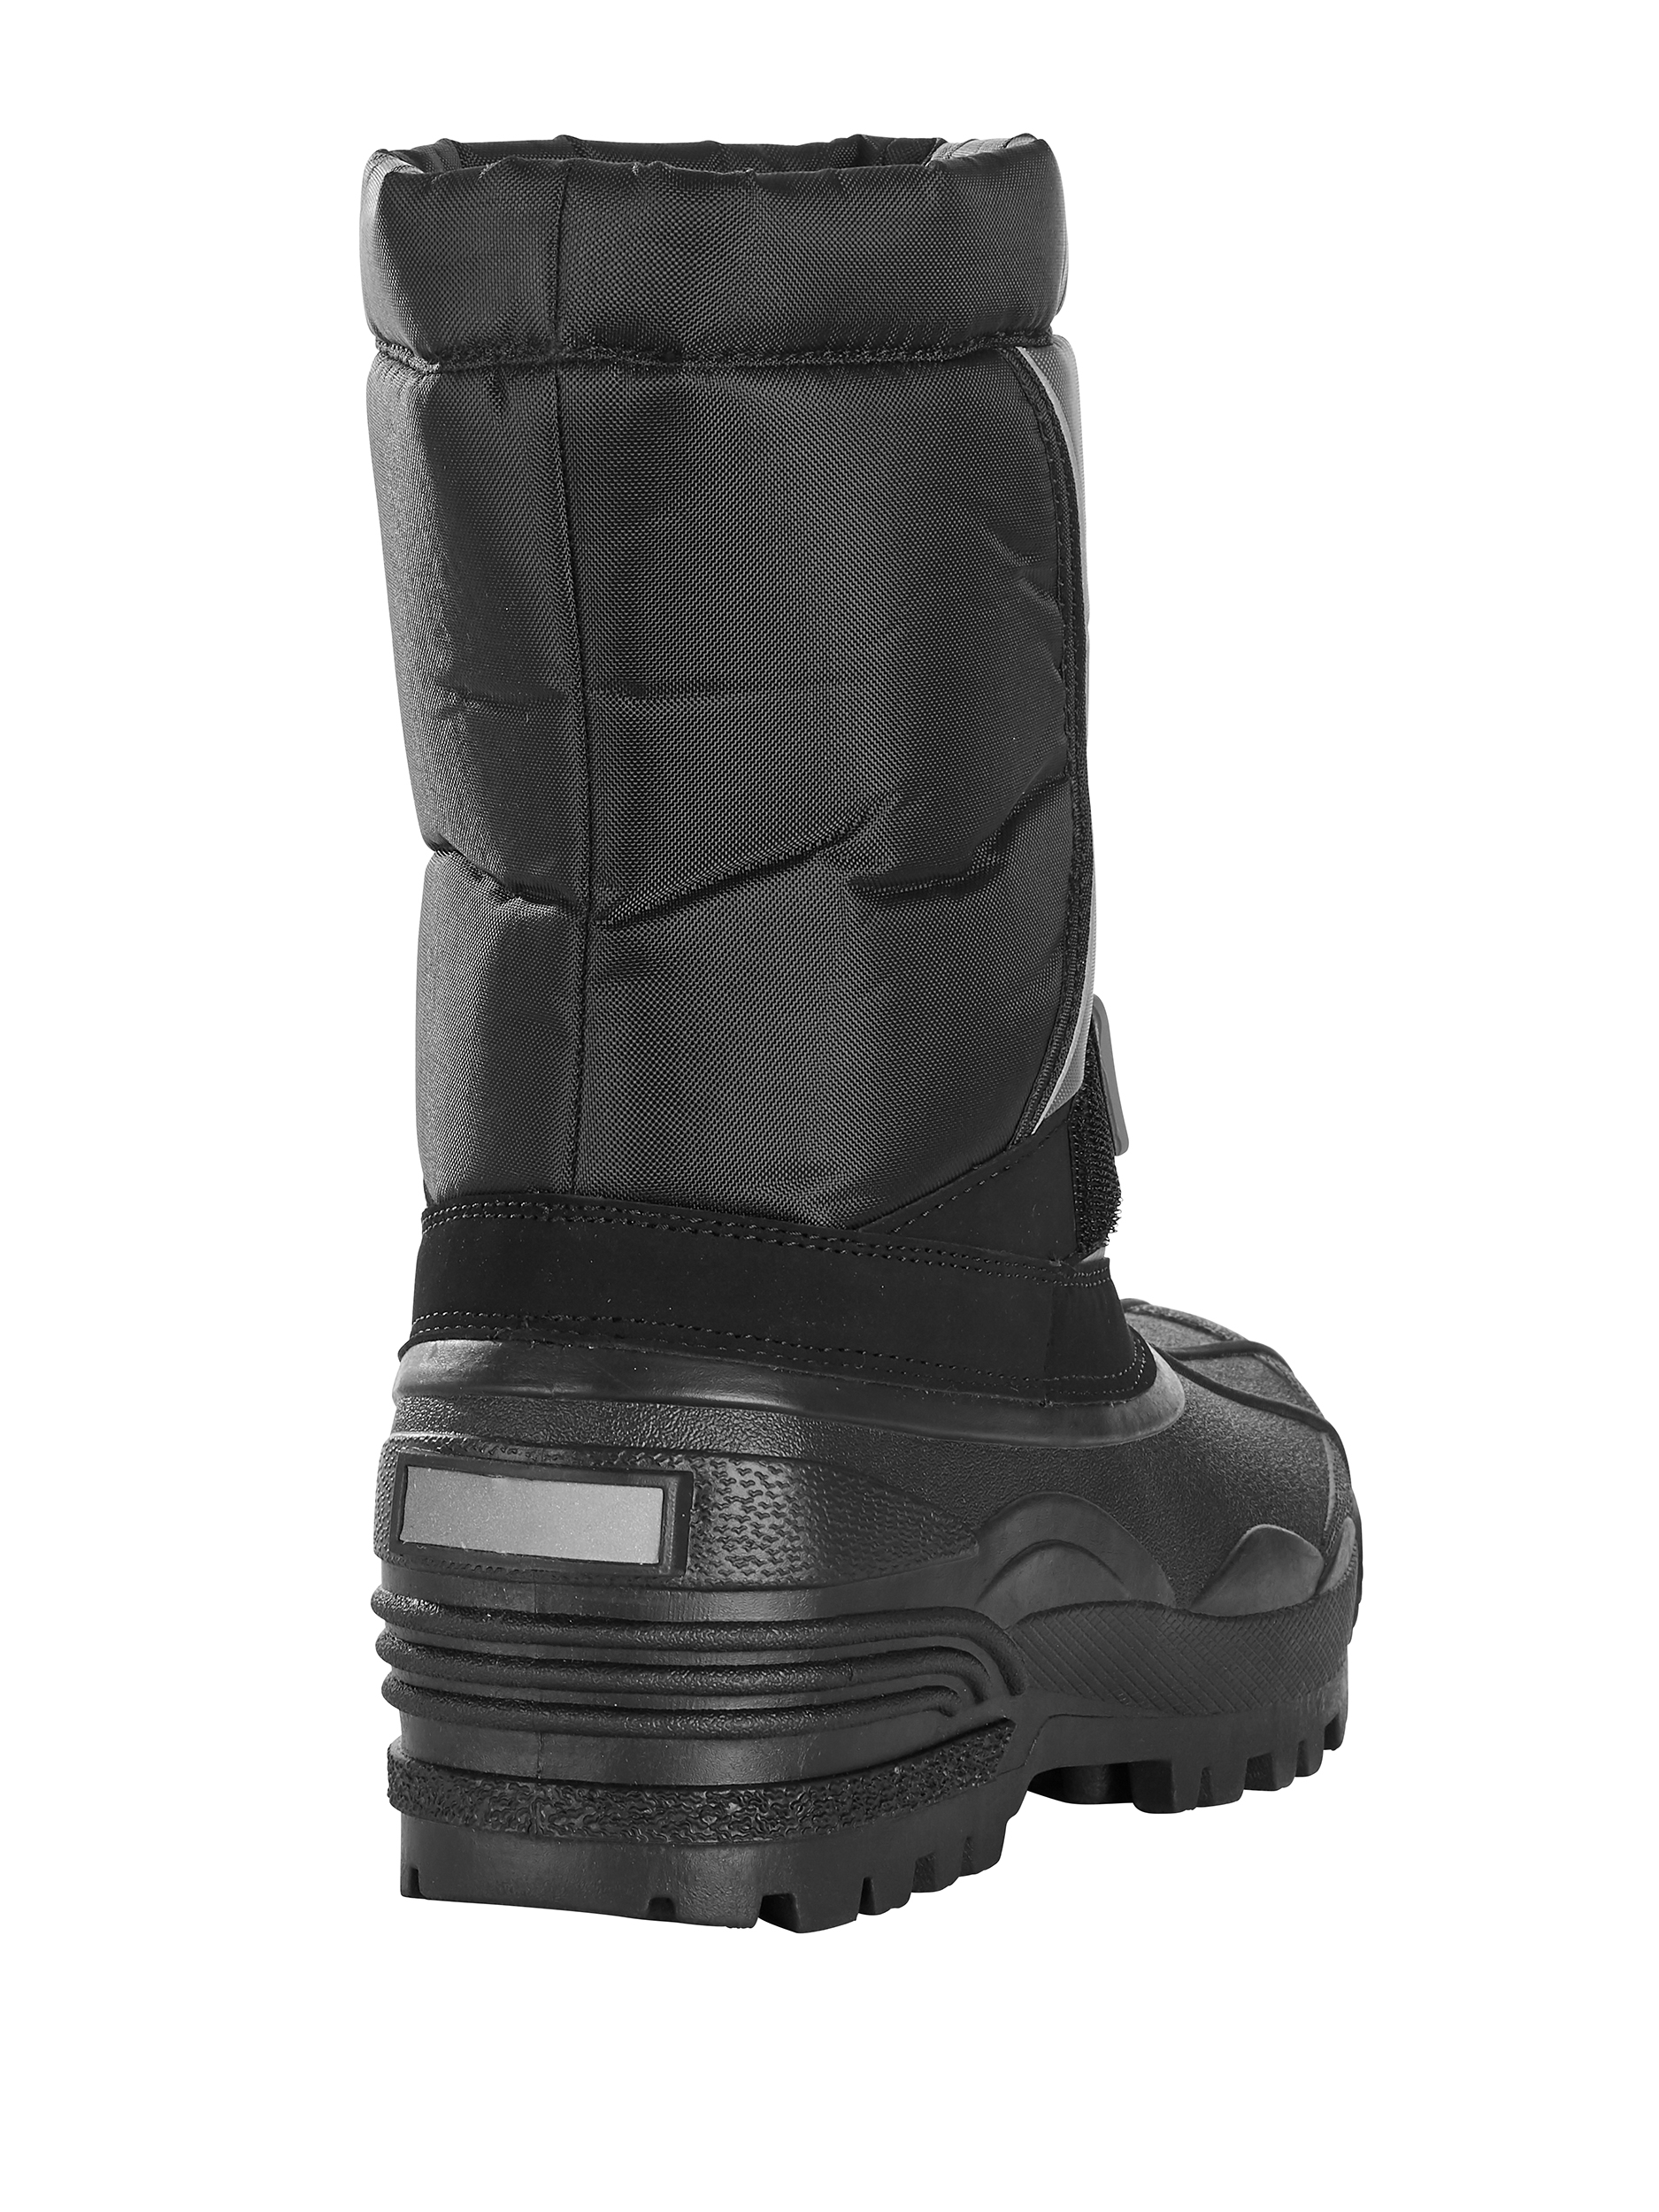 George Men's Essential Winter Boots - image 3 of 6